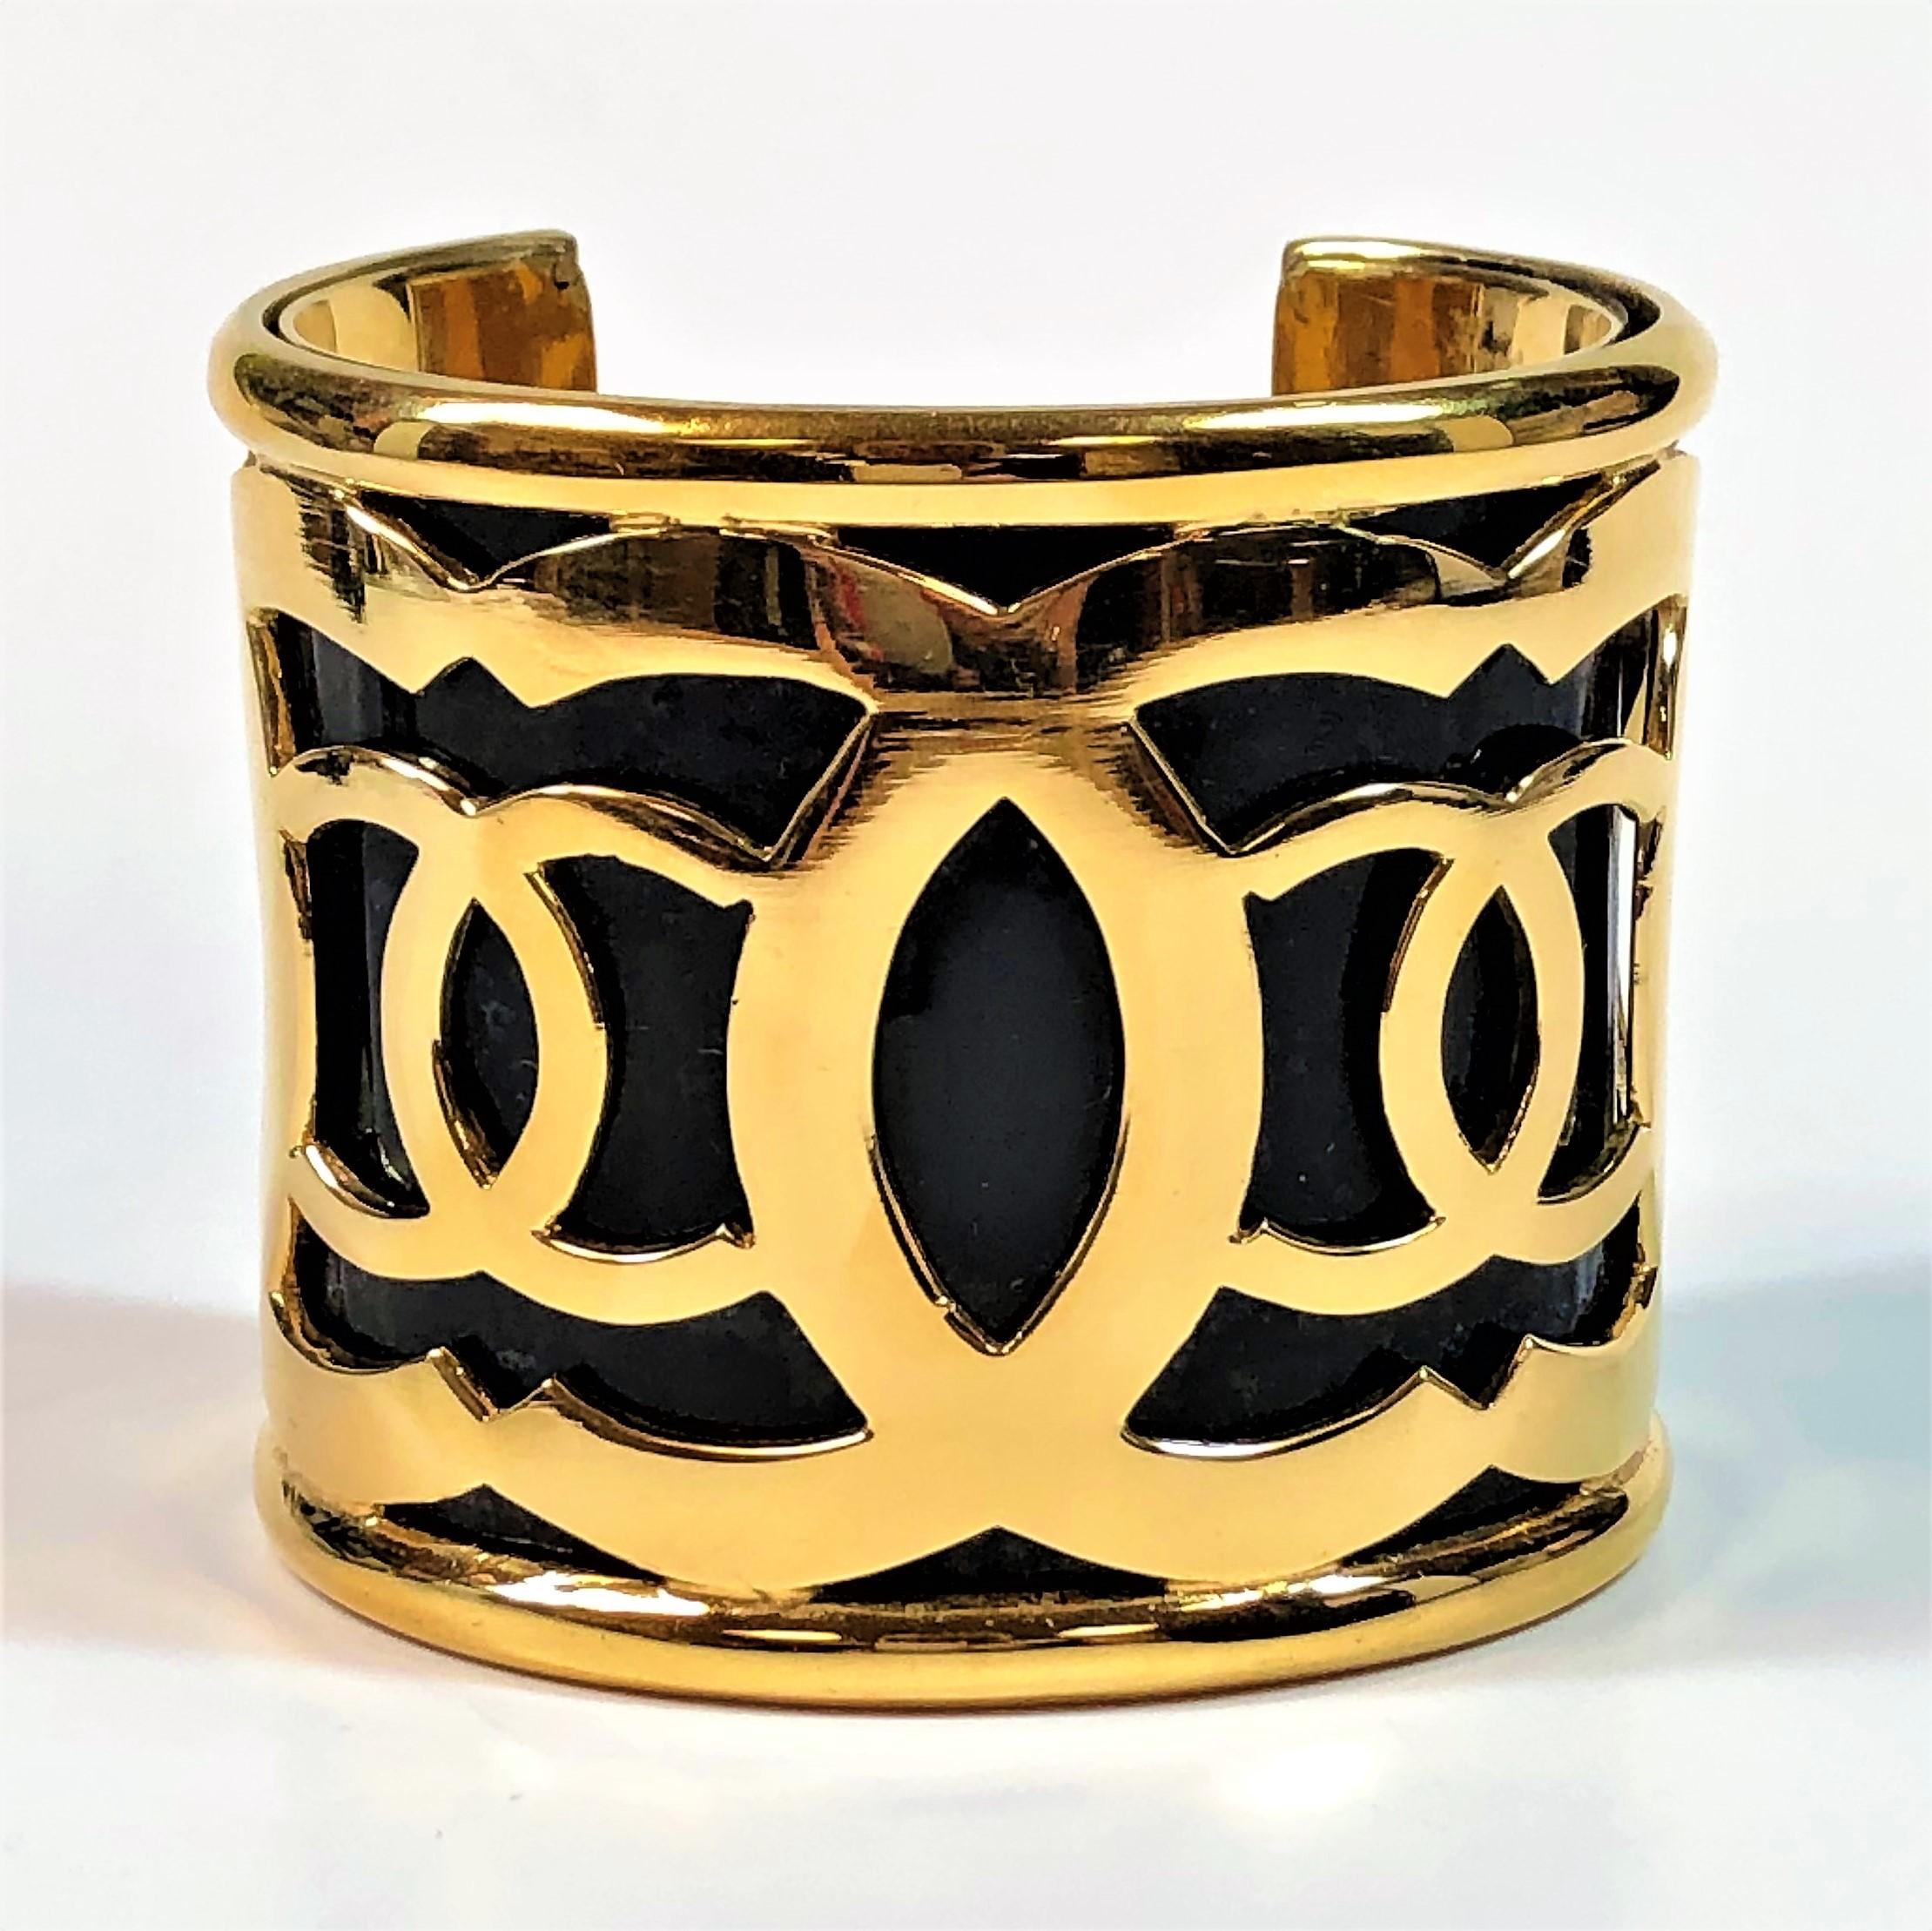 Chanel made this dramatic cuff in the mid 1980s. The gold tone CC logos cover the entire cuff over the black plastic background underneath. Open back design for ease of putting on and taking off. Measures 2  7/16 inches wide. Inside circumference is